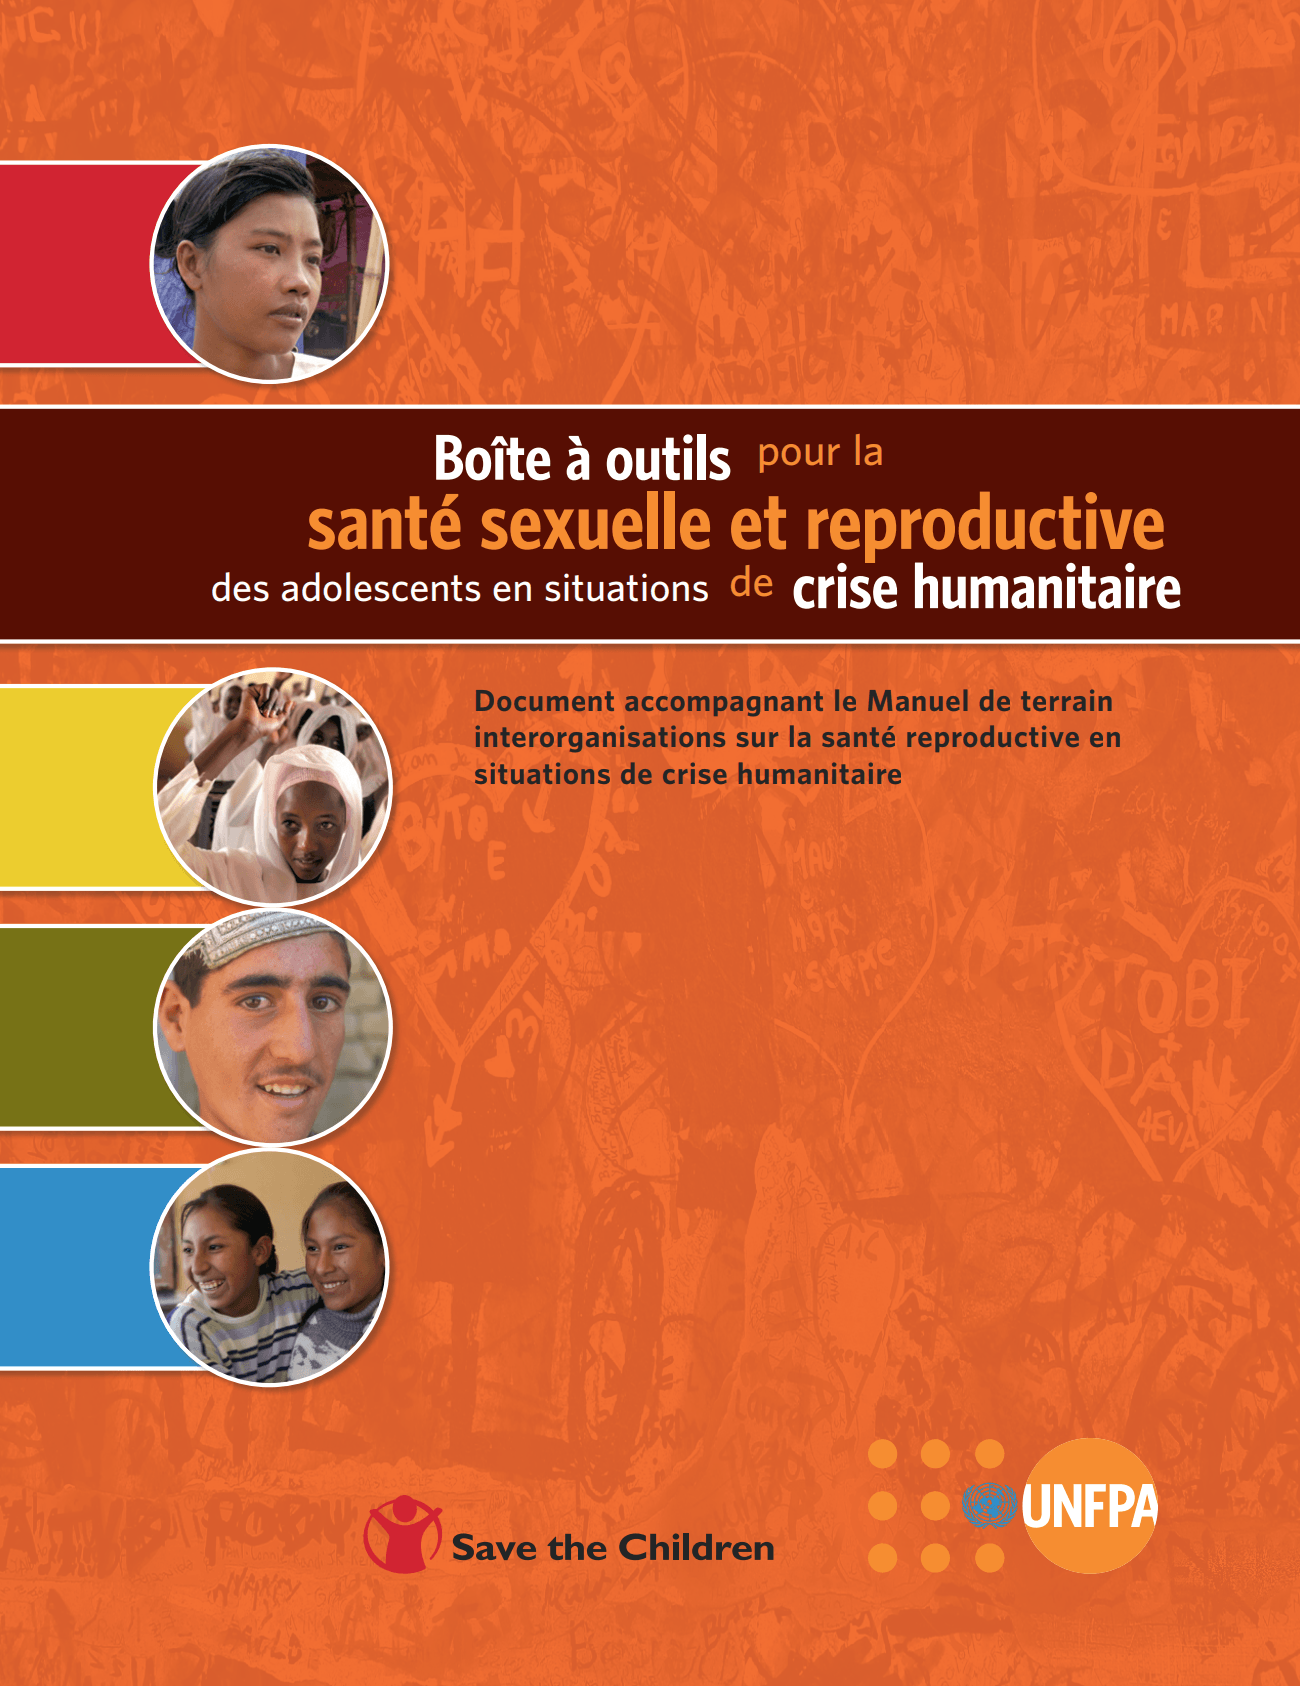 https://www.unfpa.org/sites/default/files/styles/common_style/public/pub-cover-image/Screen_Shot_2018-11-12_at_12.31.56_PM.png?itok=Jd1SIBMu